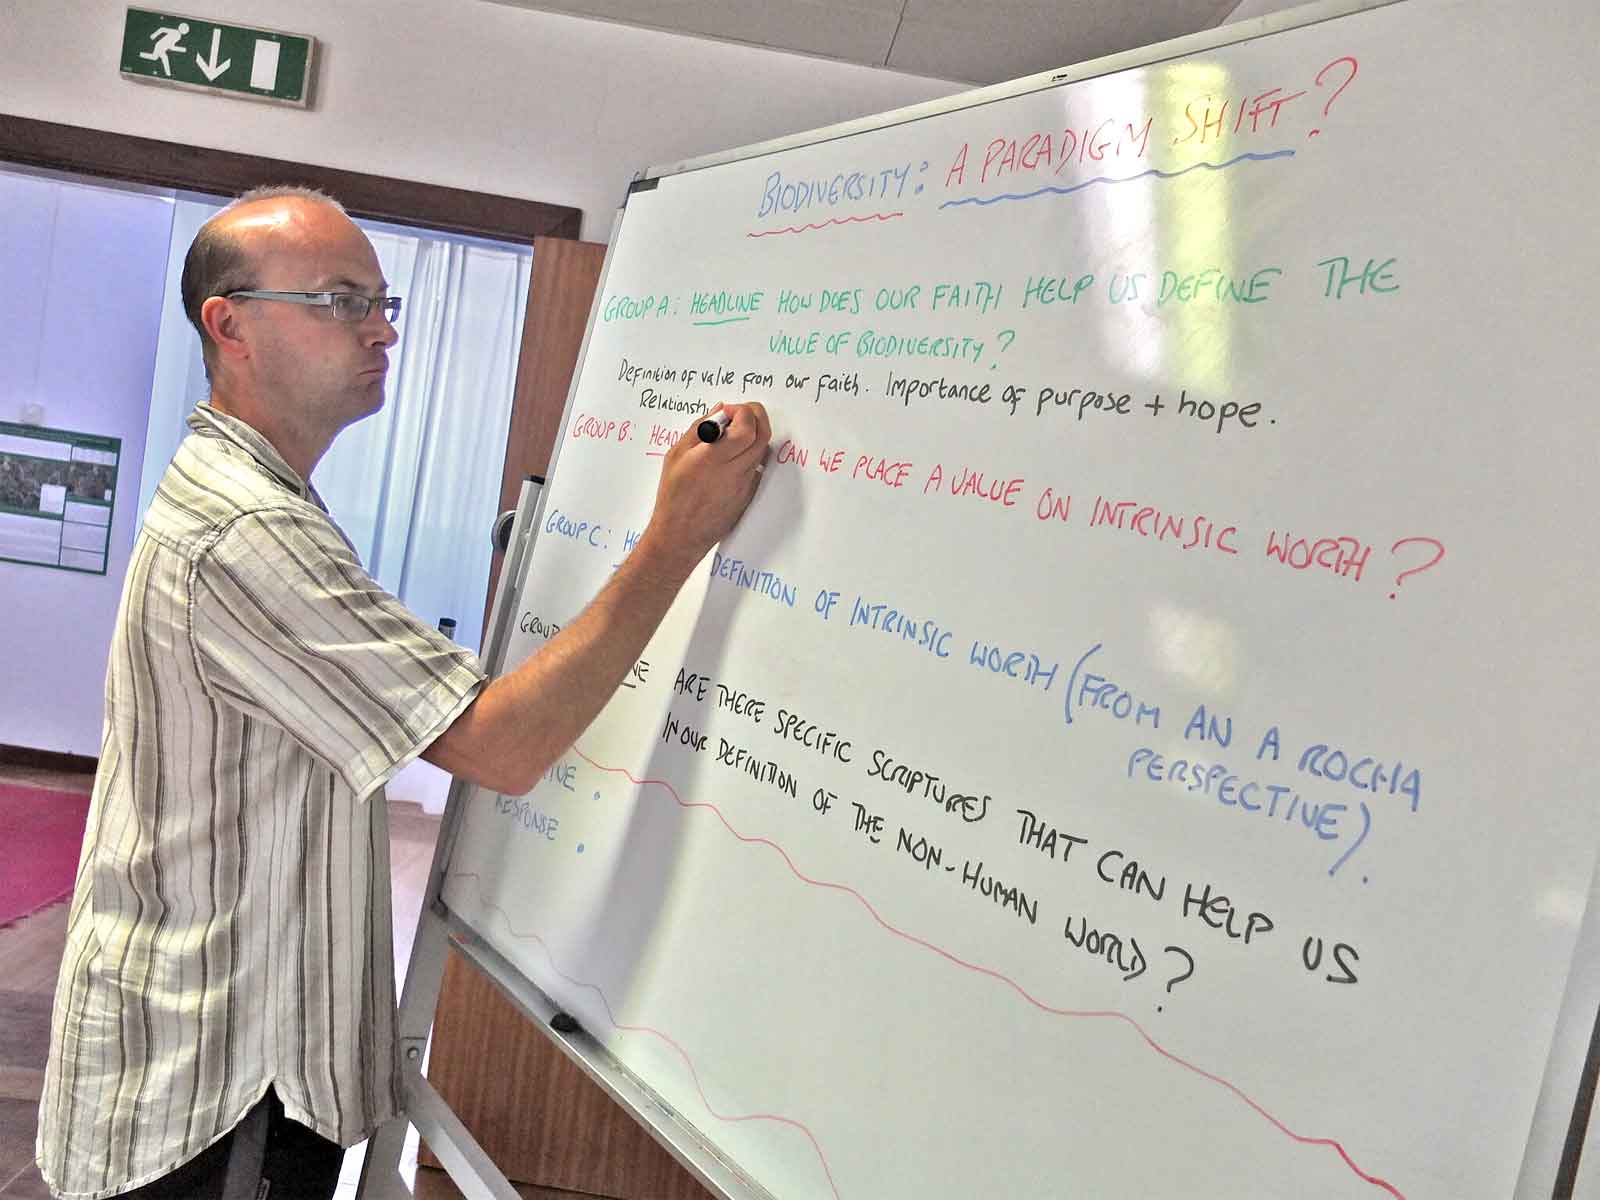 An A Rocha volunteer takes notes during a brainstorm on religion and biodiversity at a leader’s forum in Portugal.